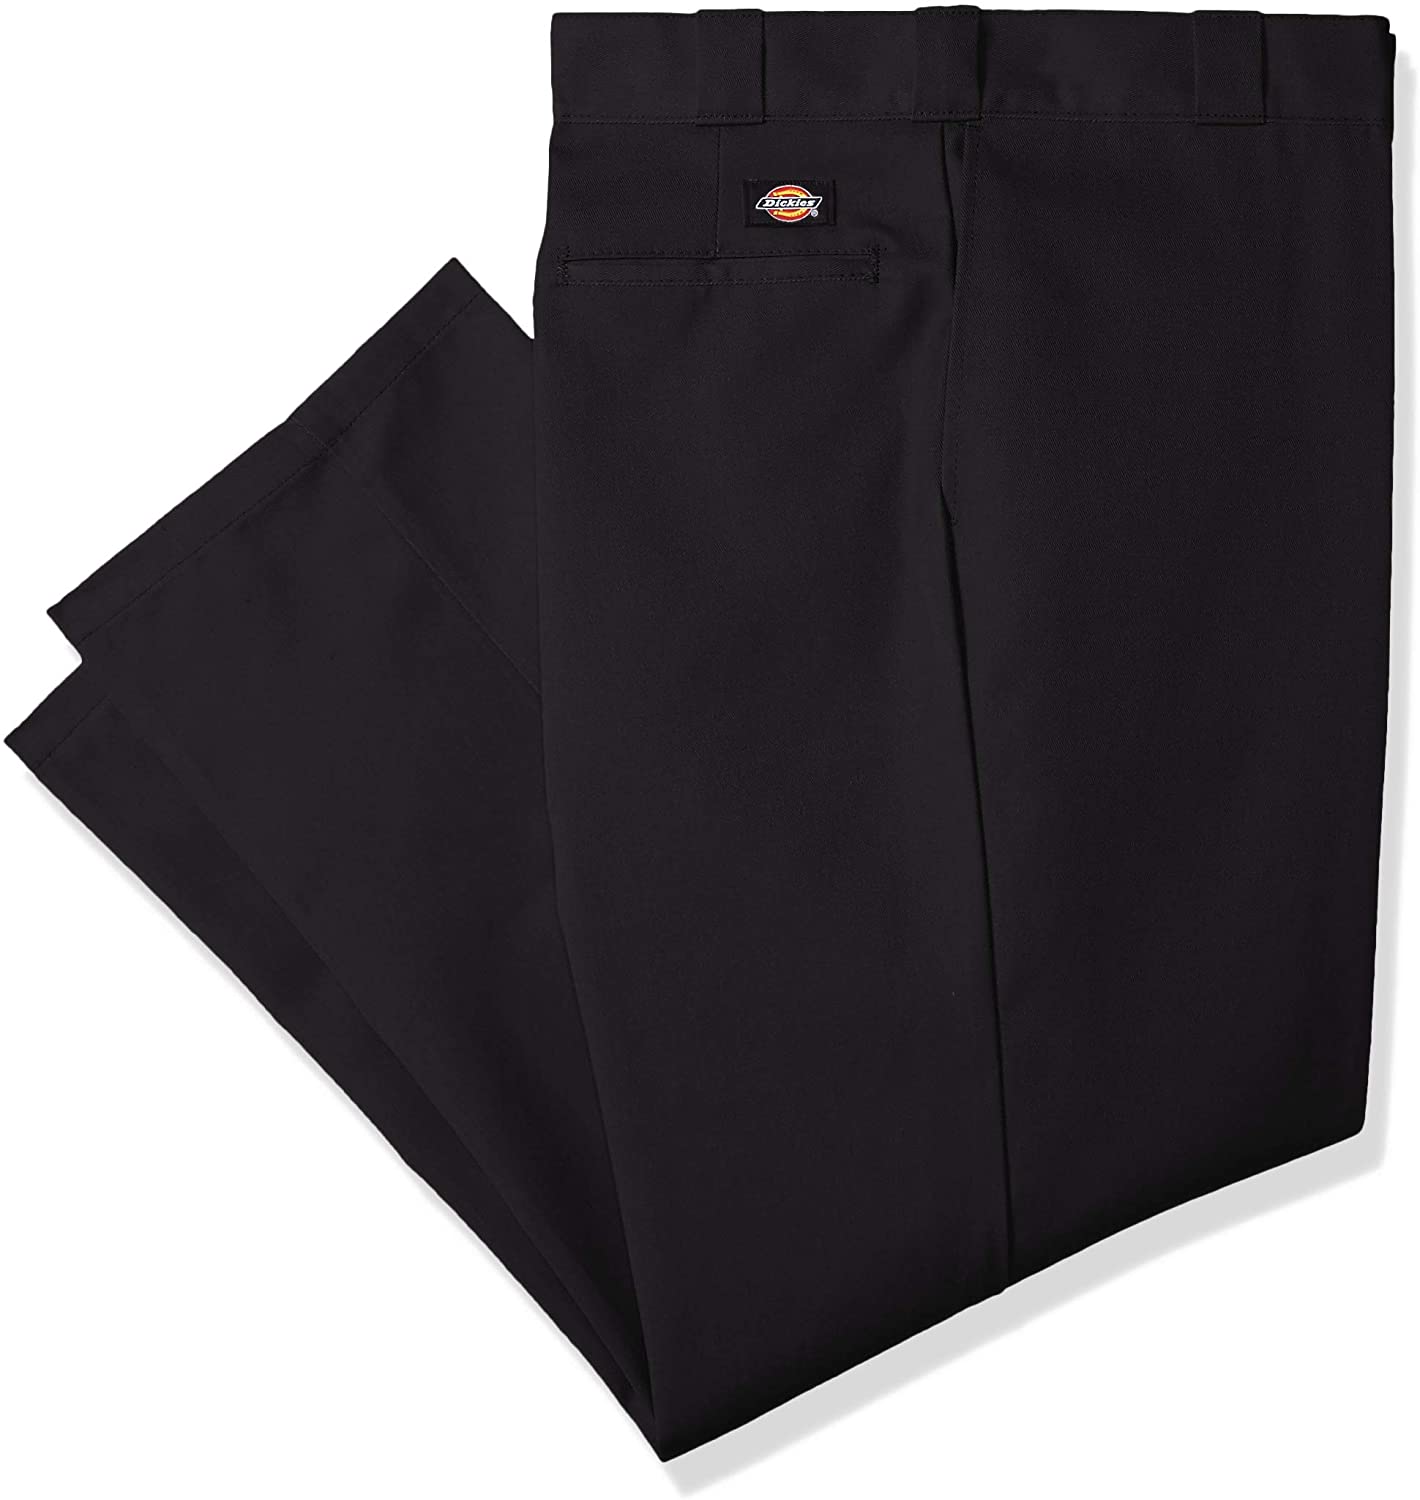 Dickies Mens Big and Tall NAVY Business Plus Size Work Dress PANTS 58W X 32L 